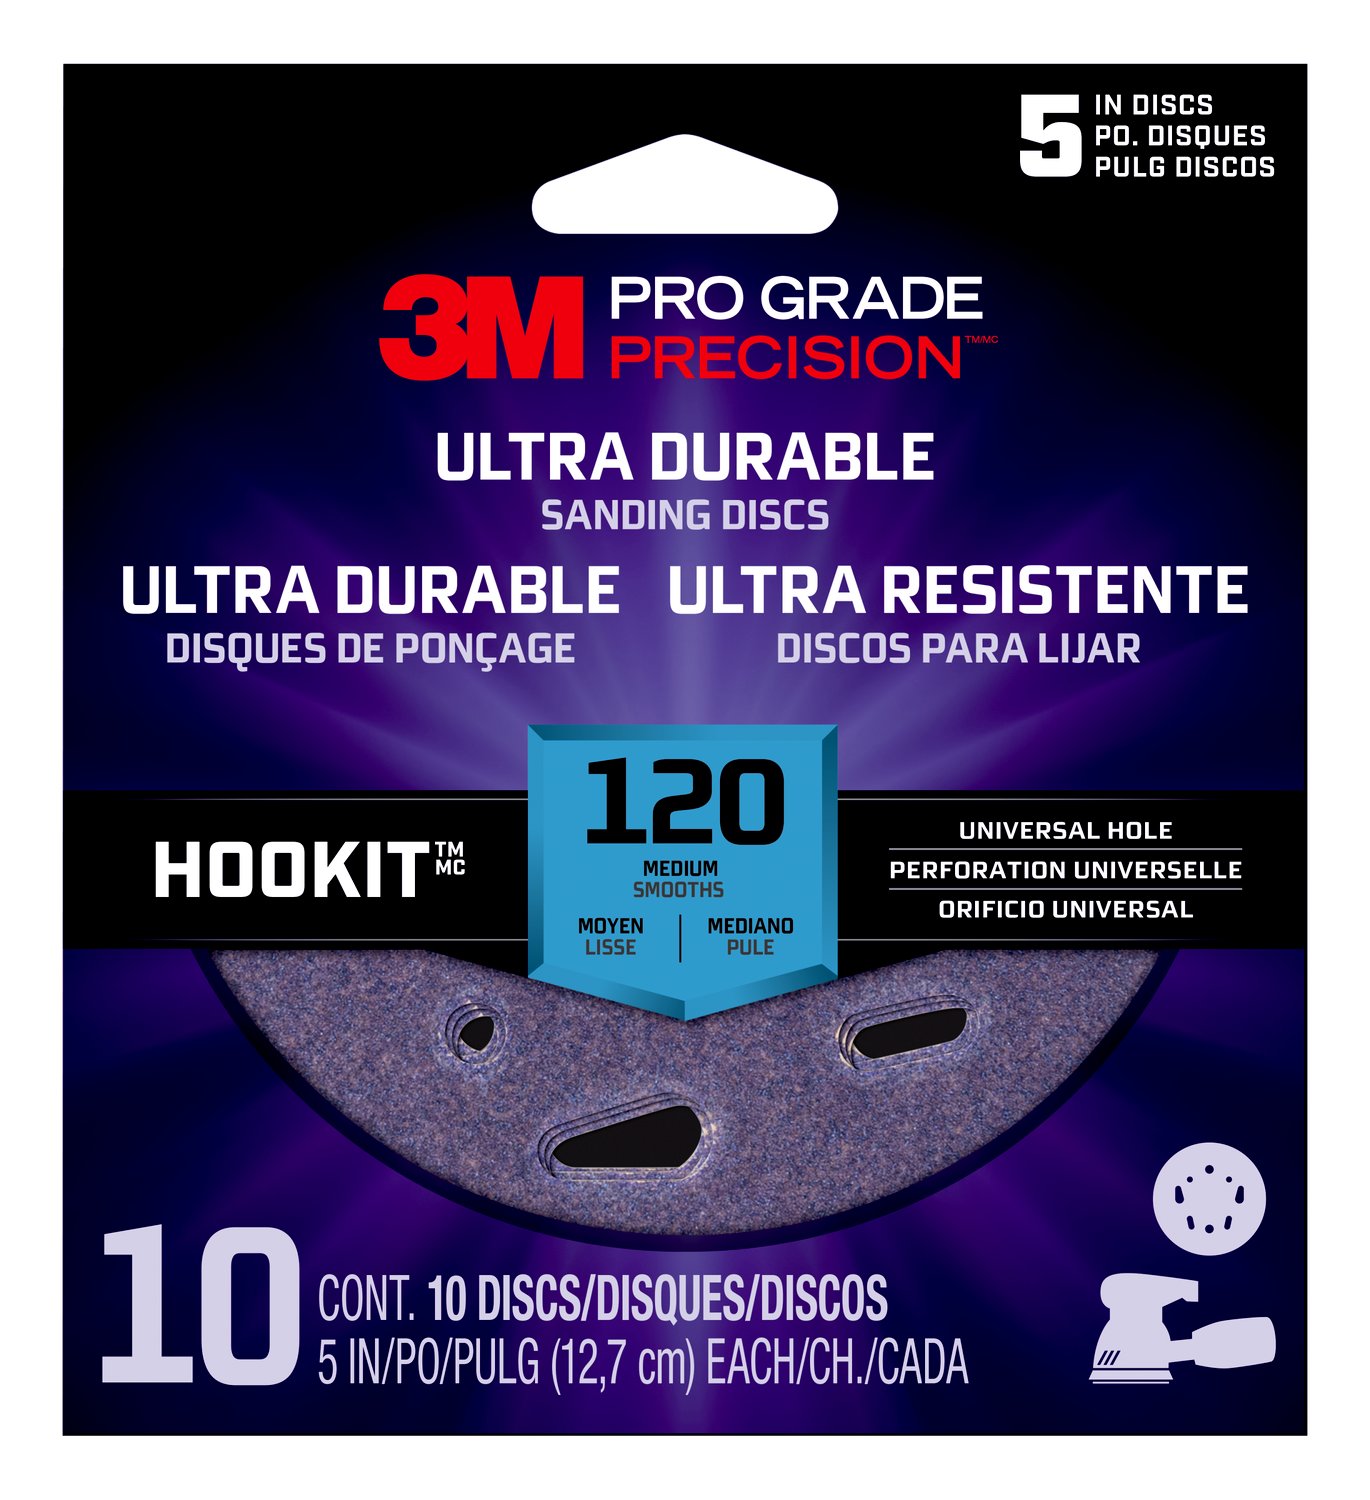 7100202873 - 3M Pro Grade Precision Ultra Durable Universal Hole Sanding Disc
DUH5120TRI-10I, 5 inch UH, 120, 10/packDisc